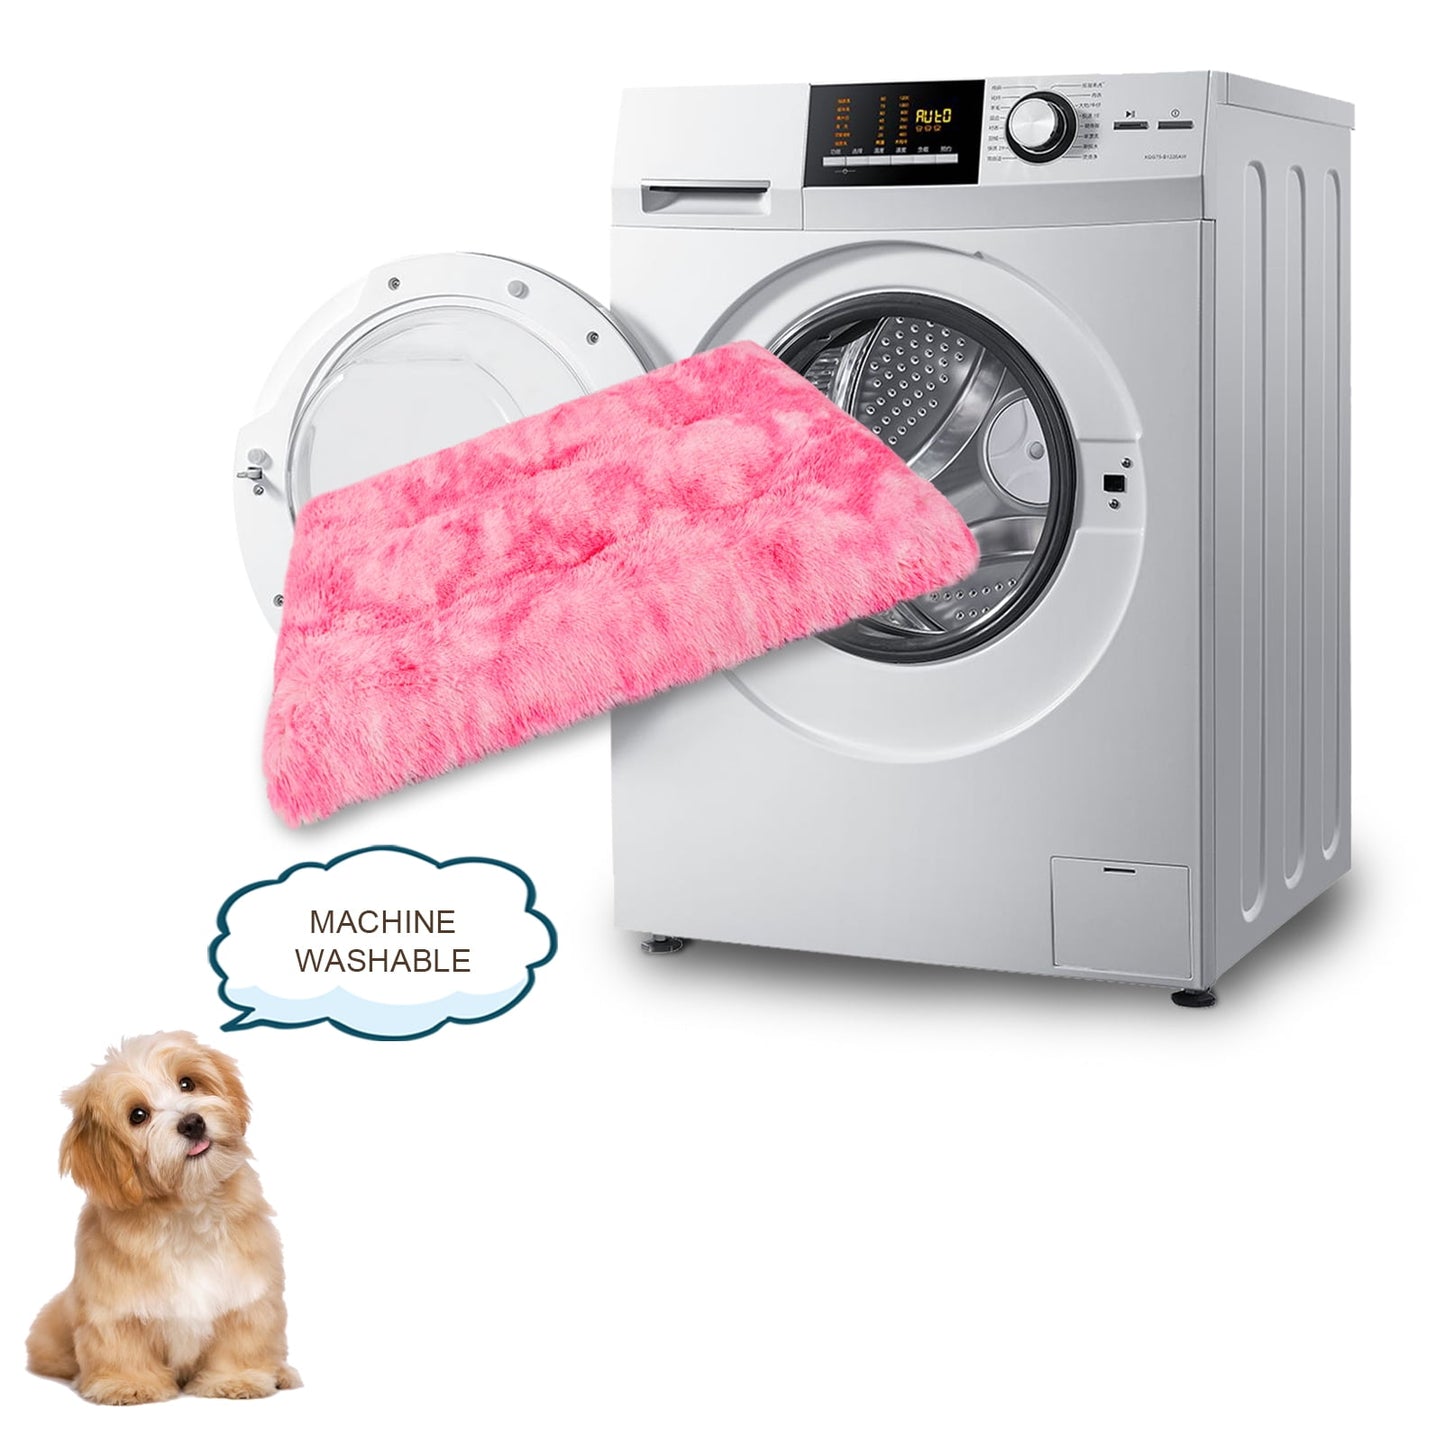 Exclusivo Mecla Soft Plush Dog Bed Crate Mat for Small Dogs (32*22*4 in), Faux Fur Fluffy Dog Pet Cat Kennel Pad with Anti-Slip Bottom, Machine Washable Gradient Pink